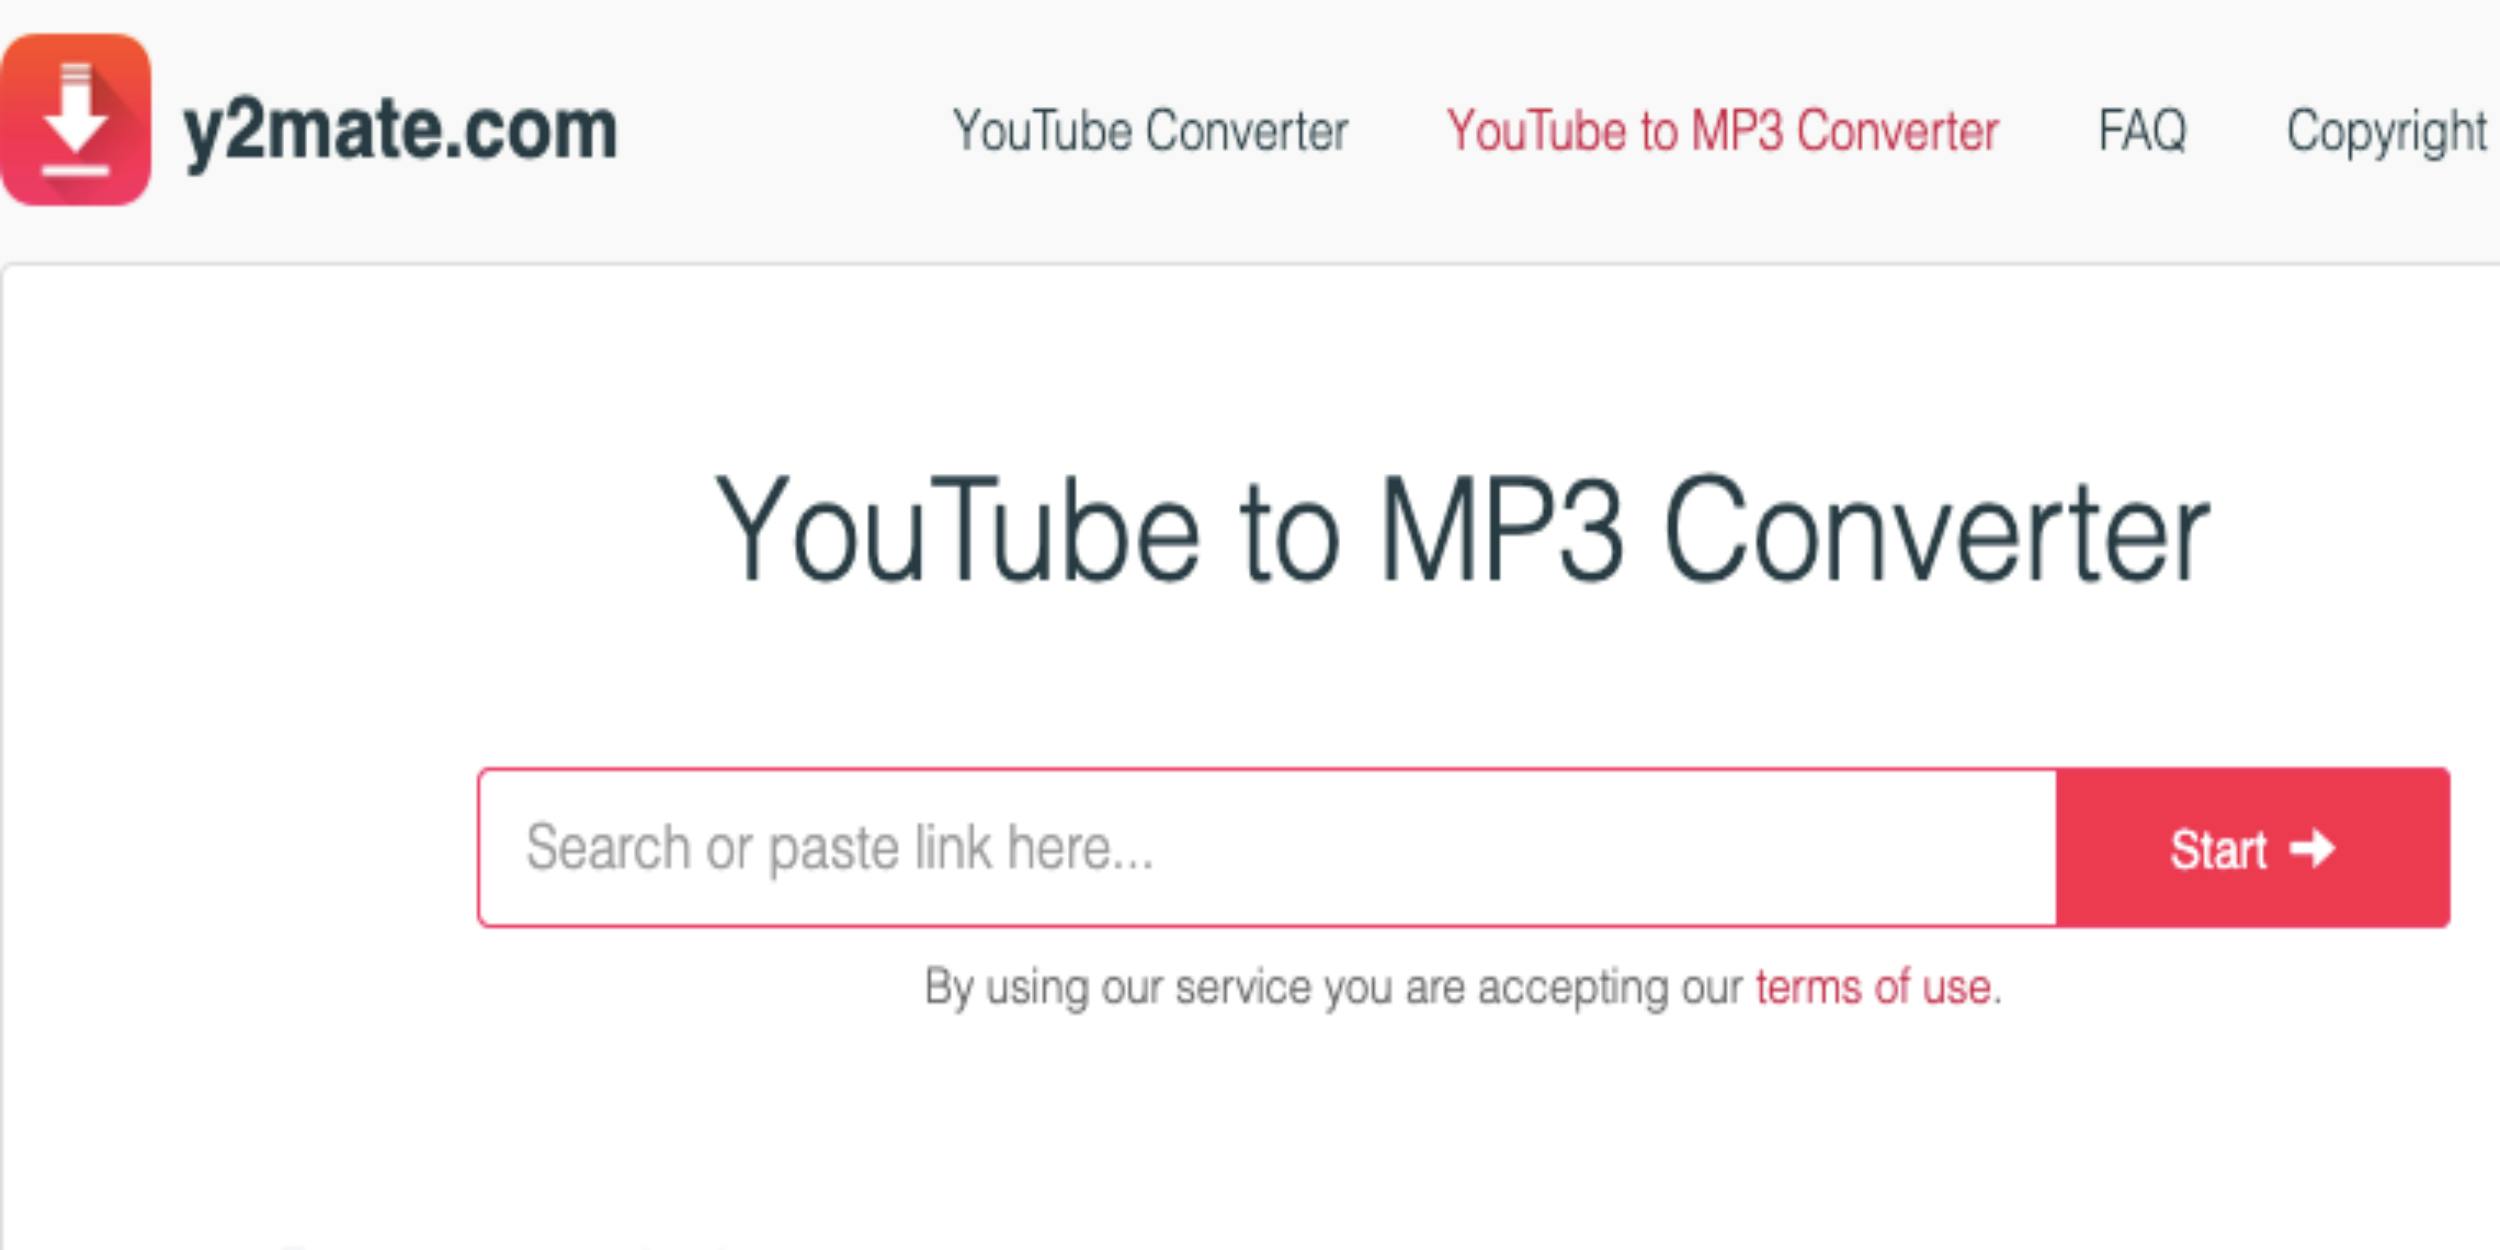 toernooi mode optellen The 5 Best Free YouTube to MP3 Converters Online